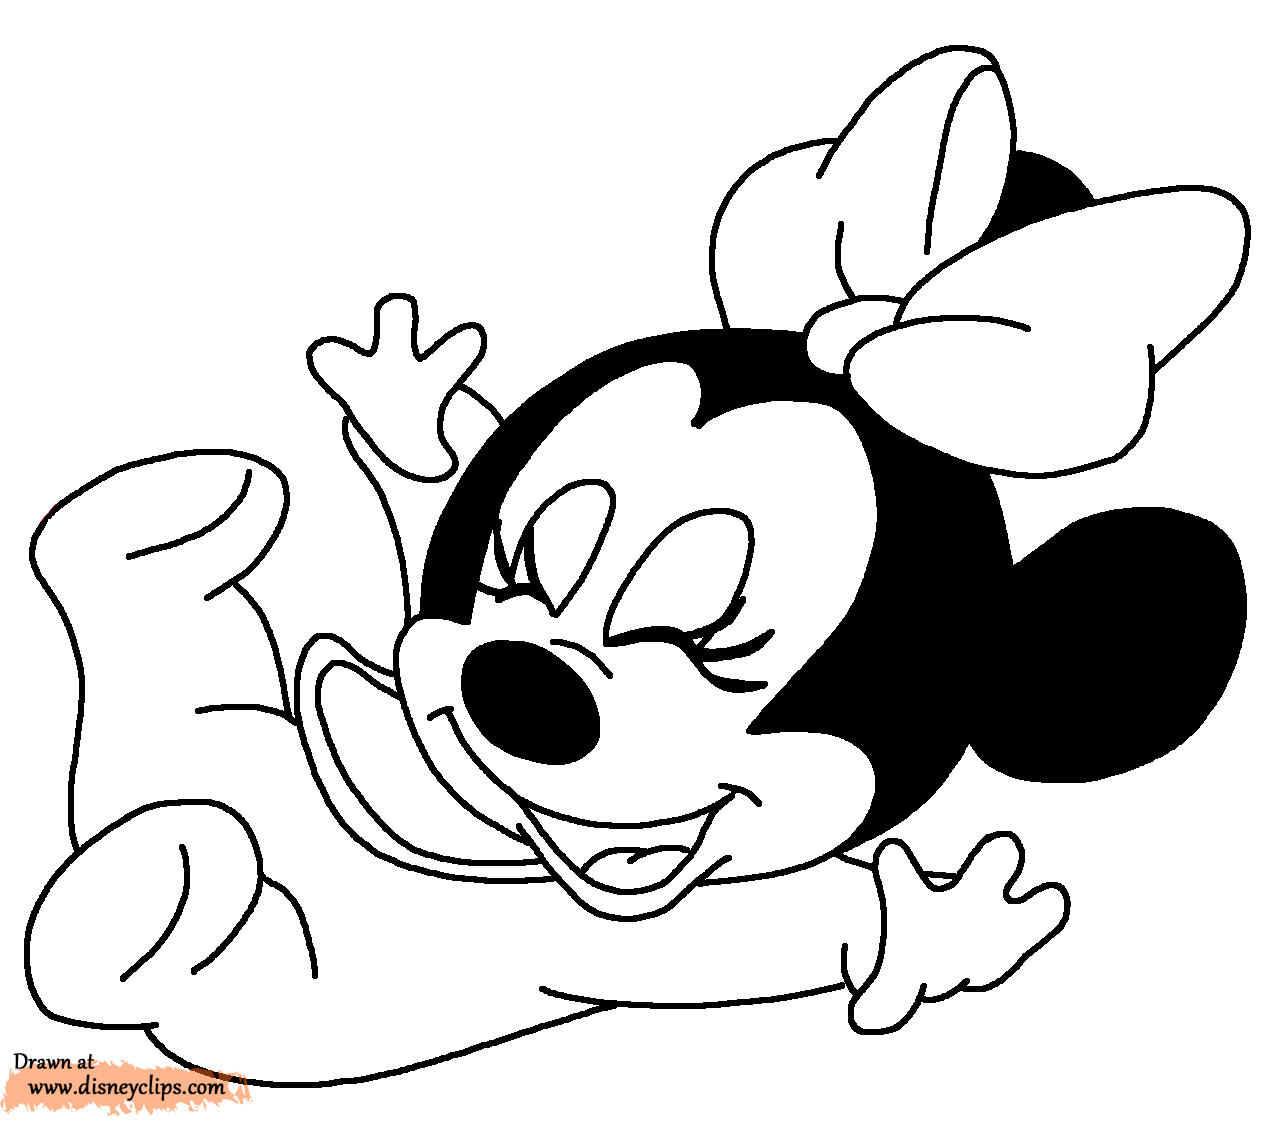 Minnie Mouse Coloring Pages For Kids Printable
 Disney Coloring Pages Minnie Mouse Printable Copics